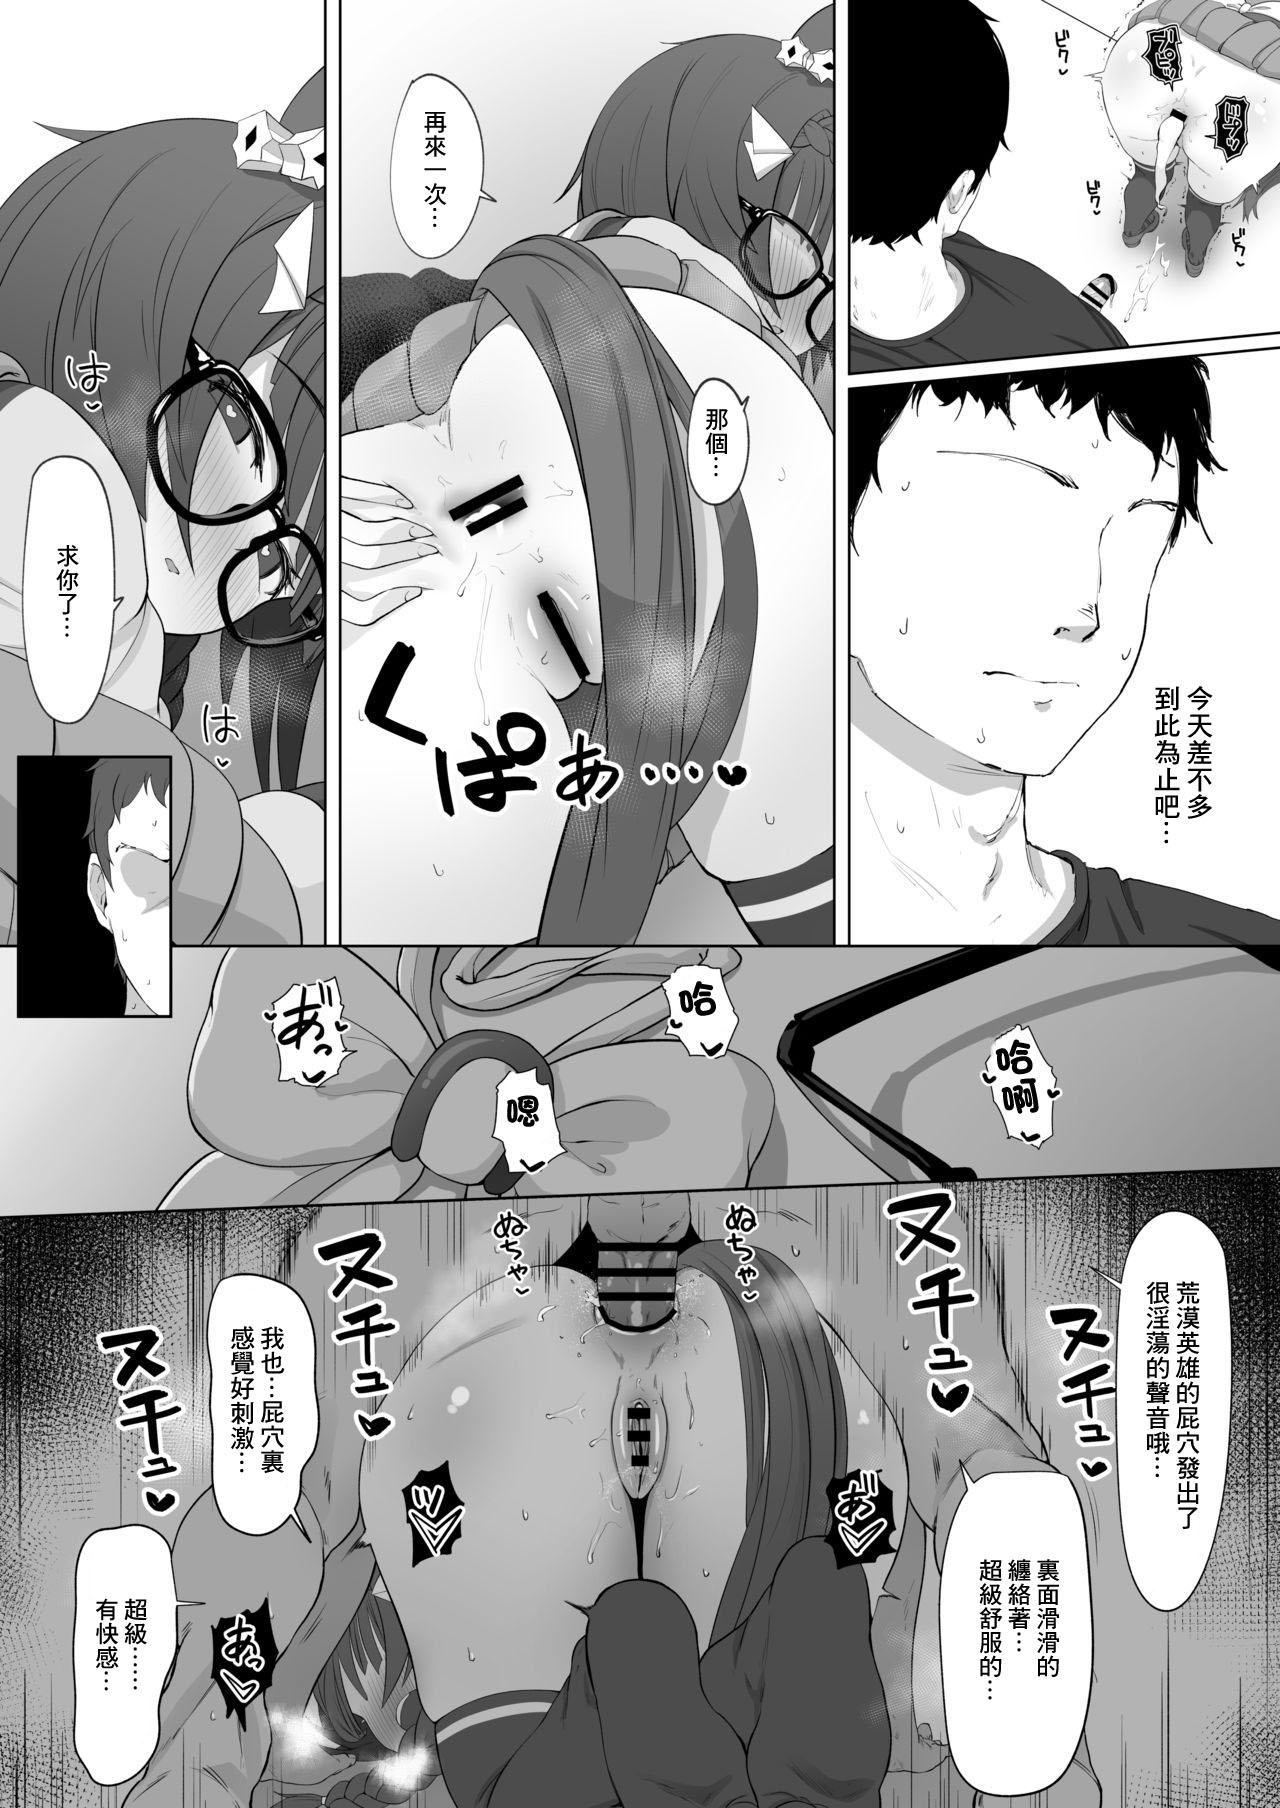 Best Blow Jobs Ever Rob Roy - Uma musume pretty derby Old Vs Young - Page 7